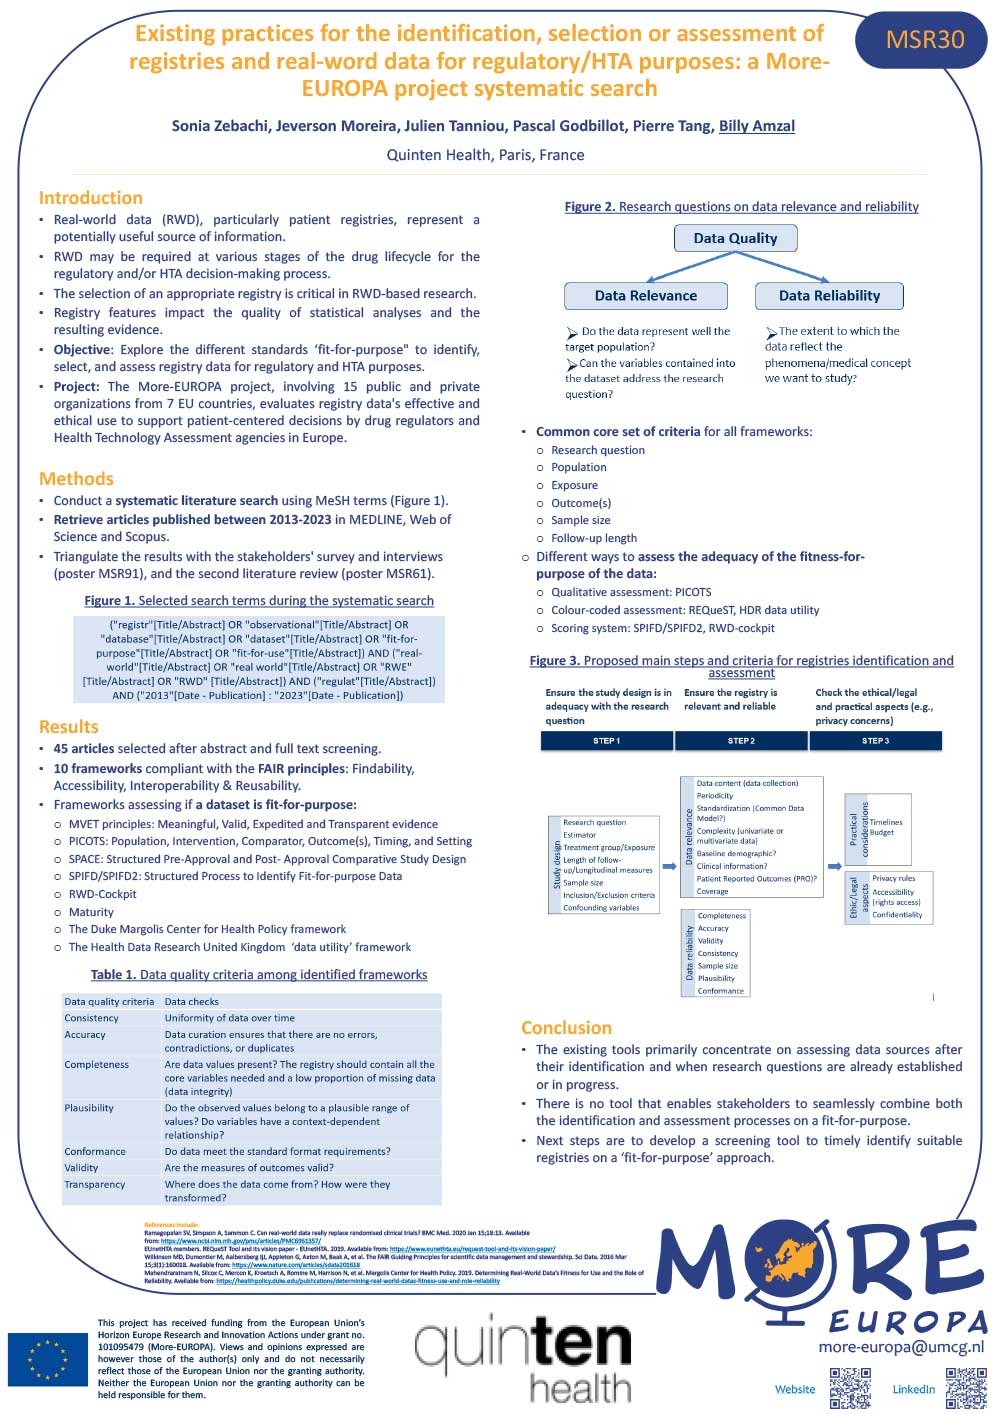 Visual of the poster entitled "Existing Practices for the Identification, Selection, or Assessment of Registries and Real-Word Data for Regulatory/HTA Purposes: A More-EUROPA Project Systematic Review"